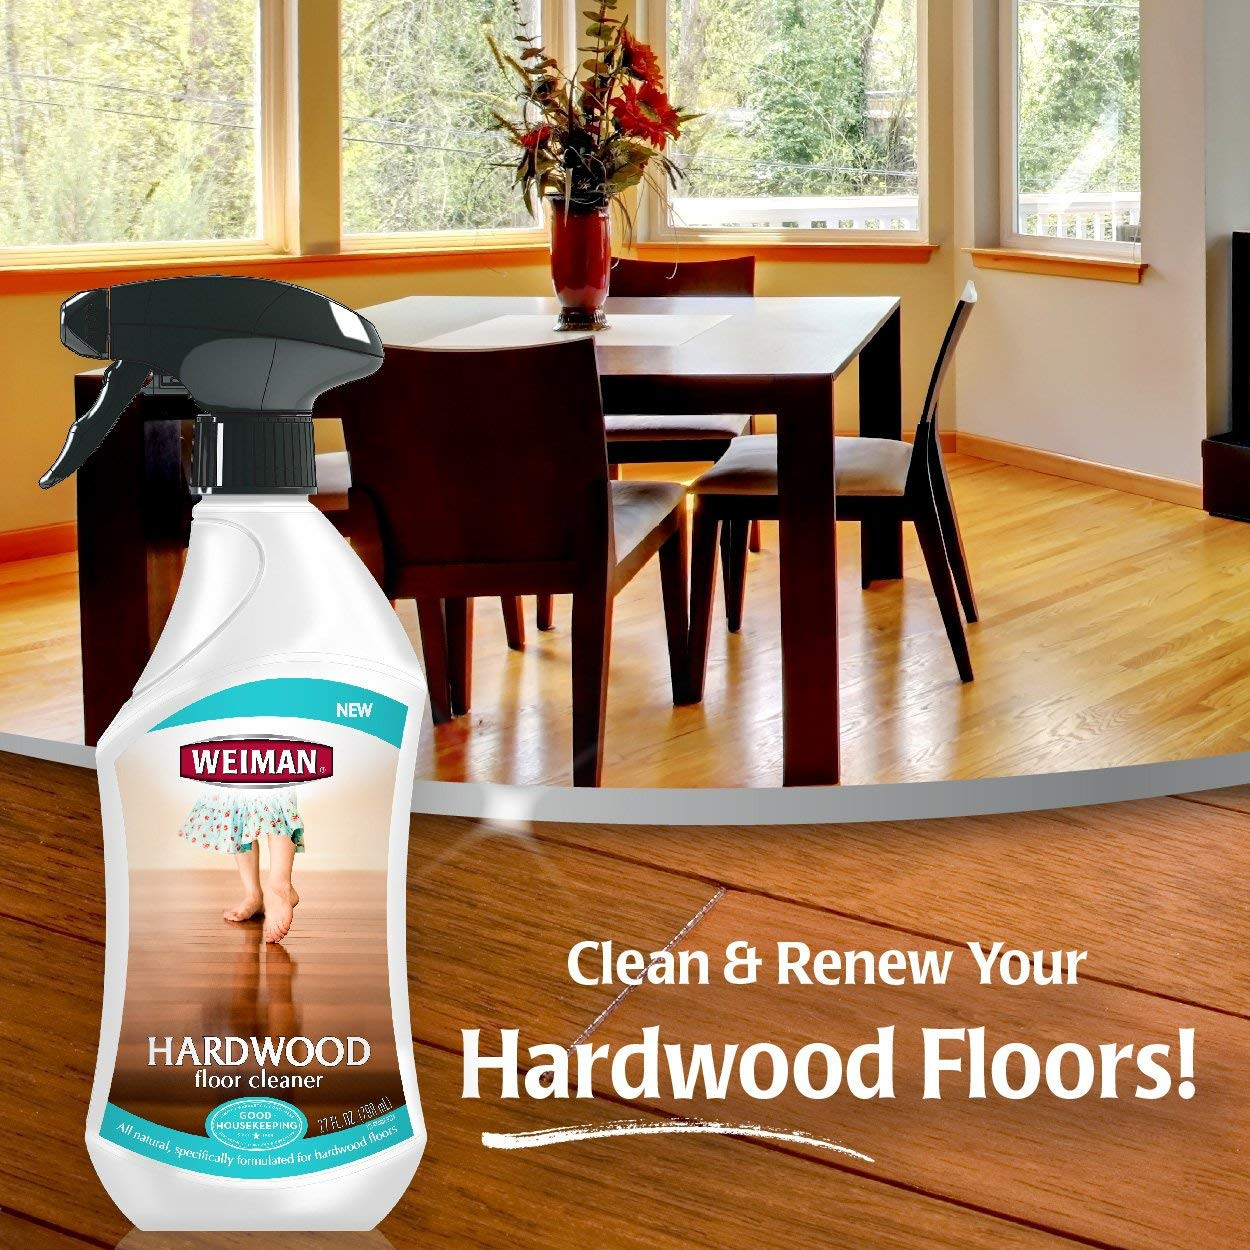 28 Nice Hardwood Floor Mop Kit 2024 free download hardwood floor mop kit of amazon com weiman hardwood floor cleaner surface safe no harsh with amazon com weiman hardwood floor cleaner surface safe no harsh scent safe for use around kids an